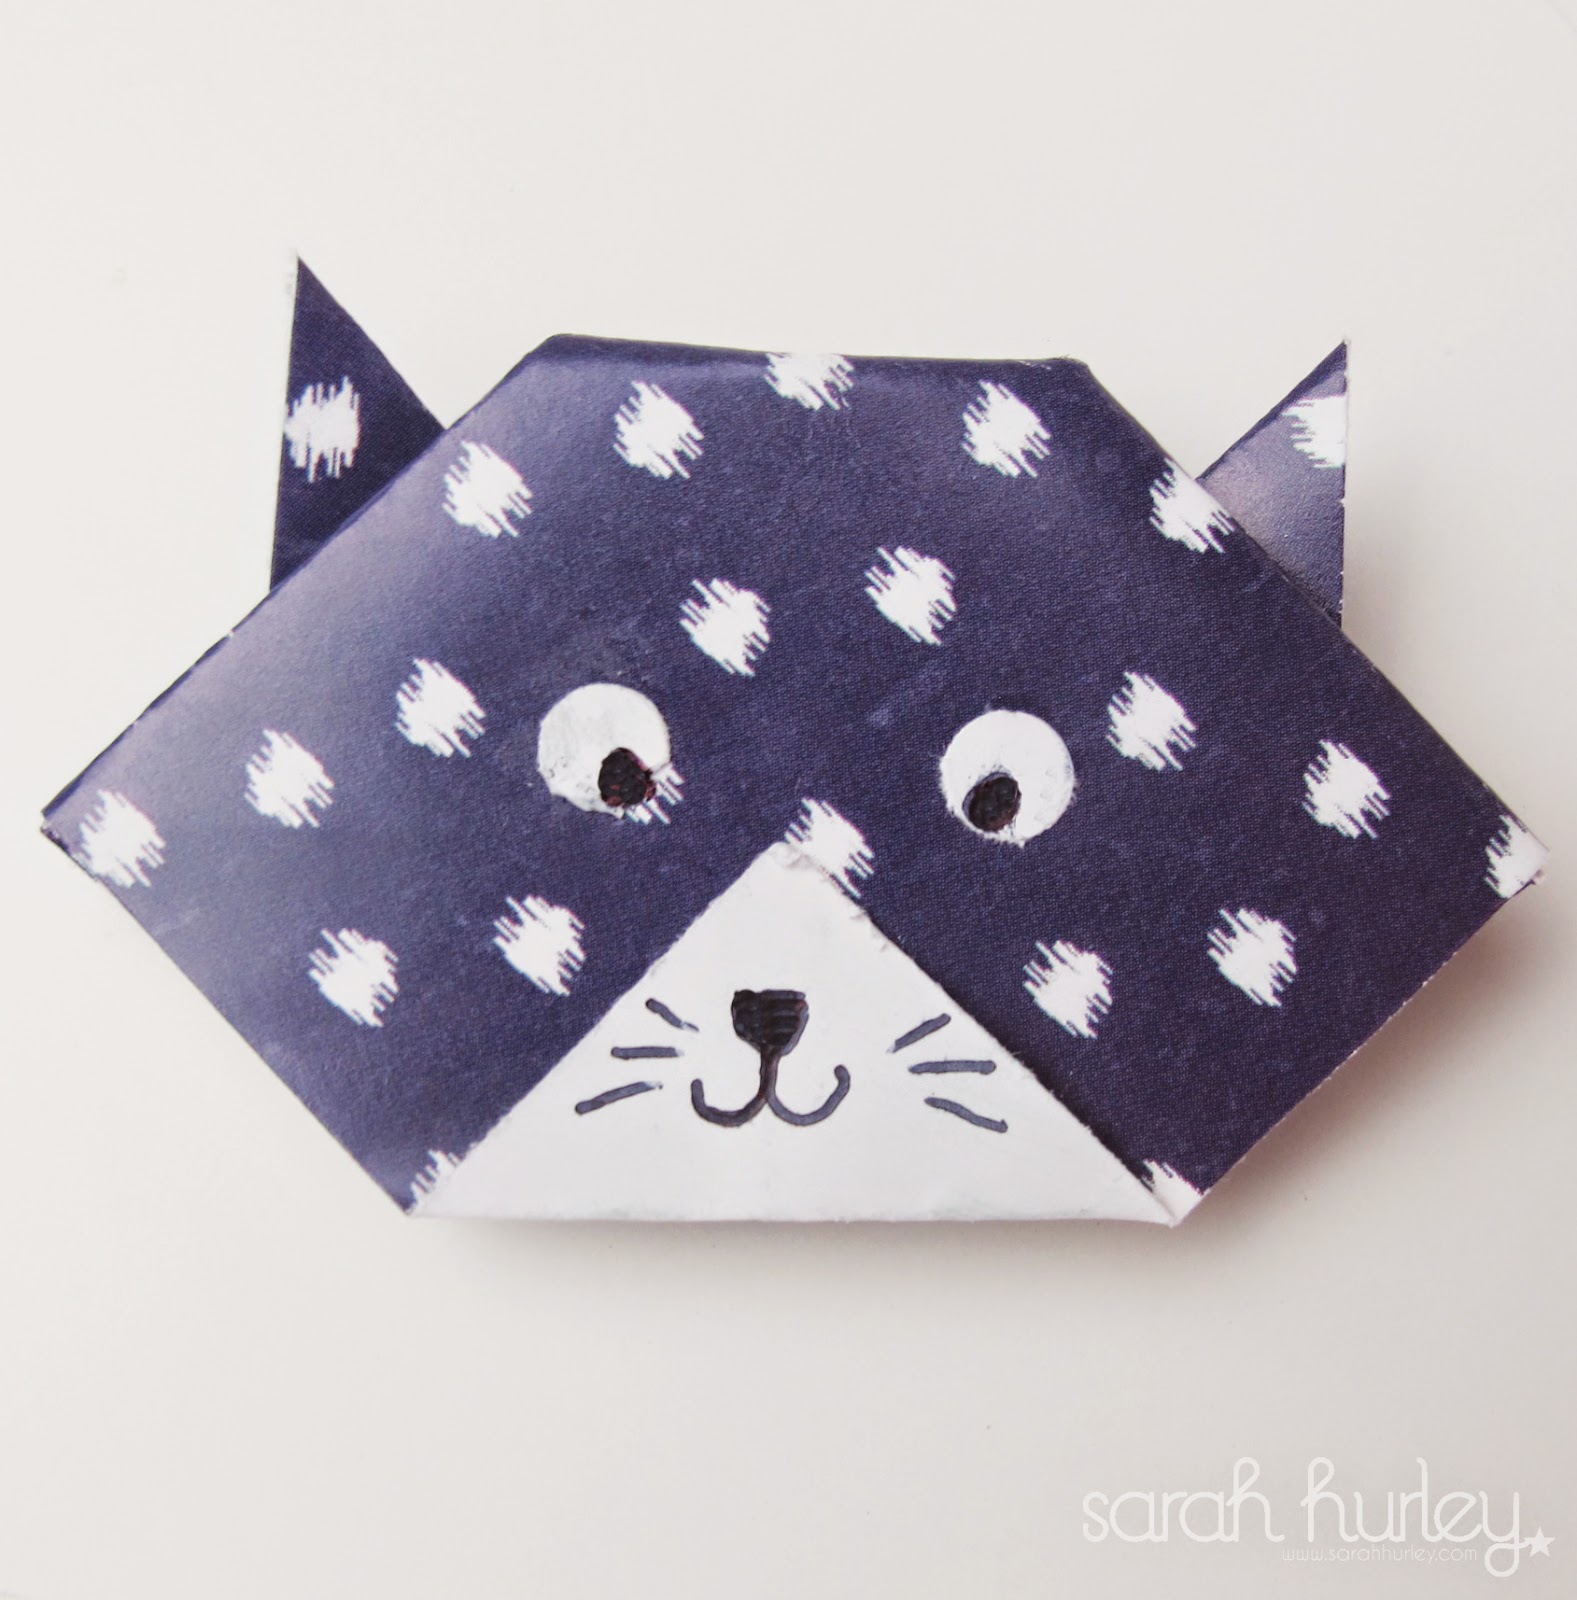 Sarah Hurley Blog: Cat Face Origami Step by Step - Papercraft Inspirations